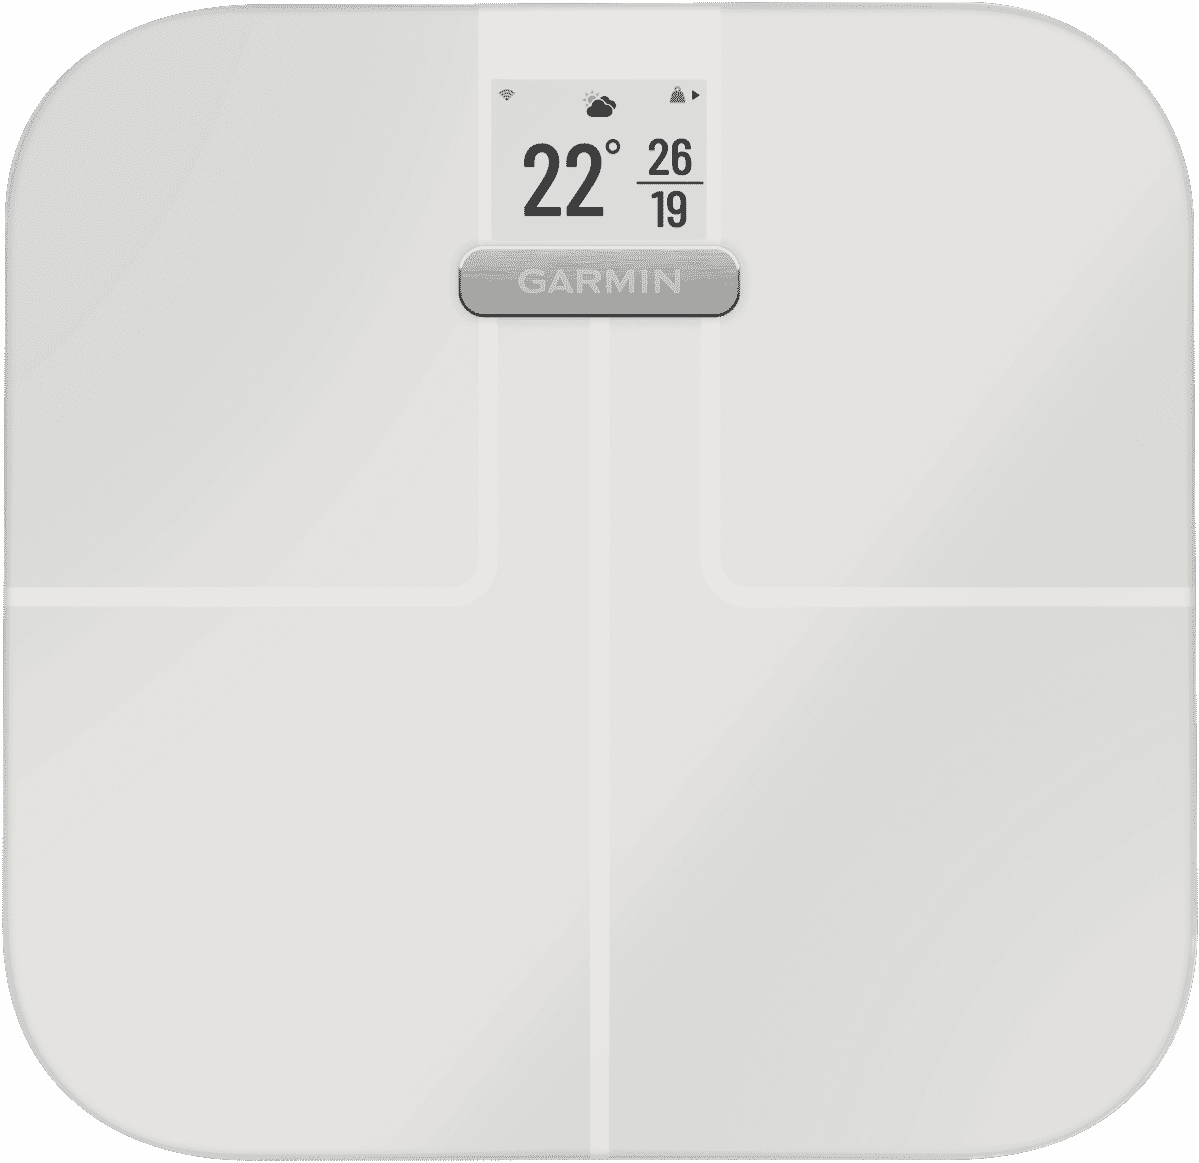 Garmin Index S2 Smart Scale with WI-FI Connectivity 